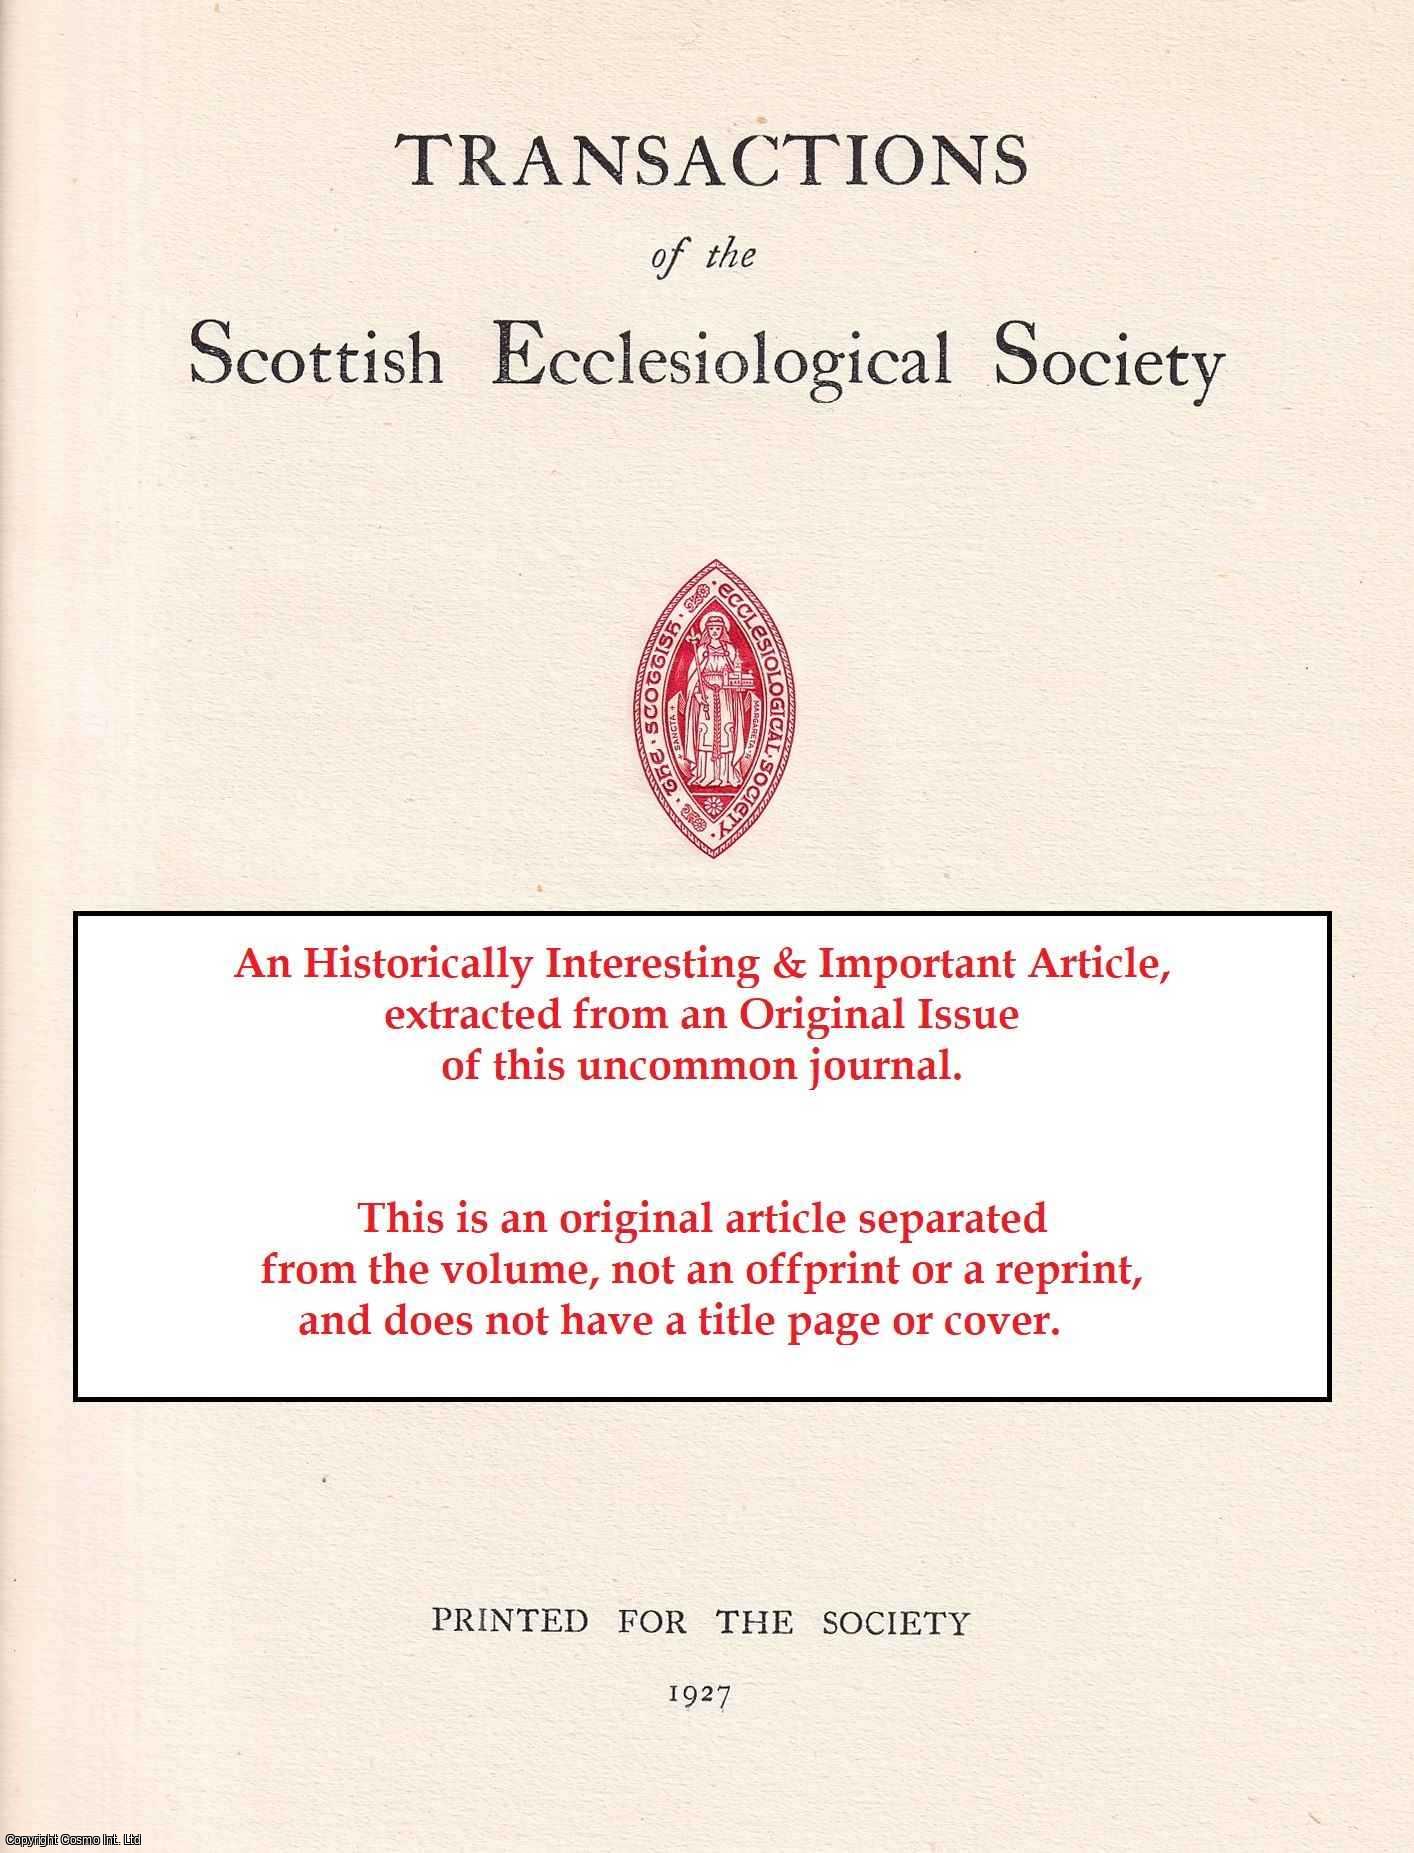 T. Newbigging Adamson - Fifeshire Churches. An original article from the Transactions of the Aberdeen Ecclesiological Society, 1889.